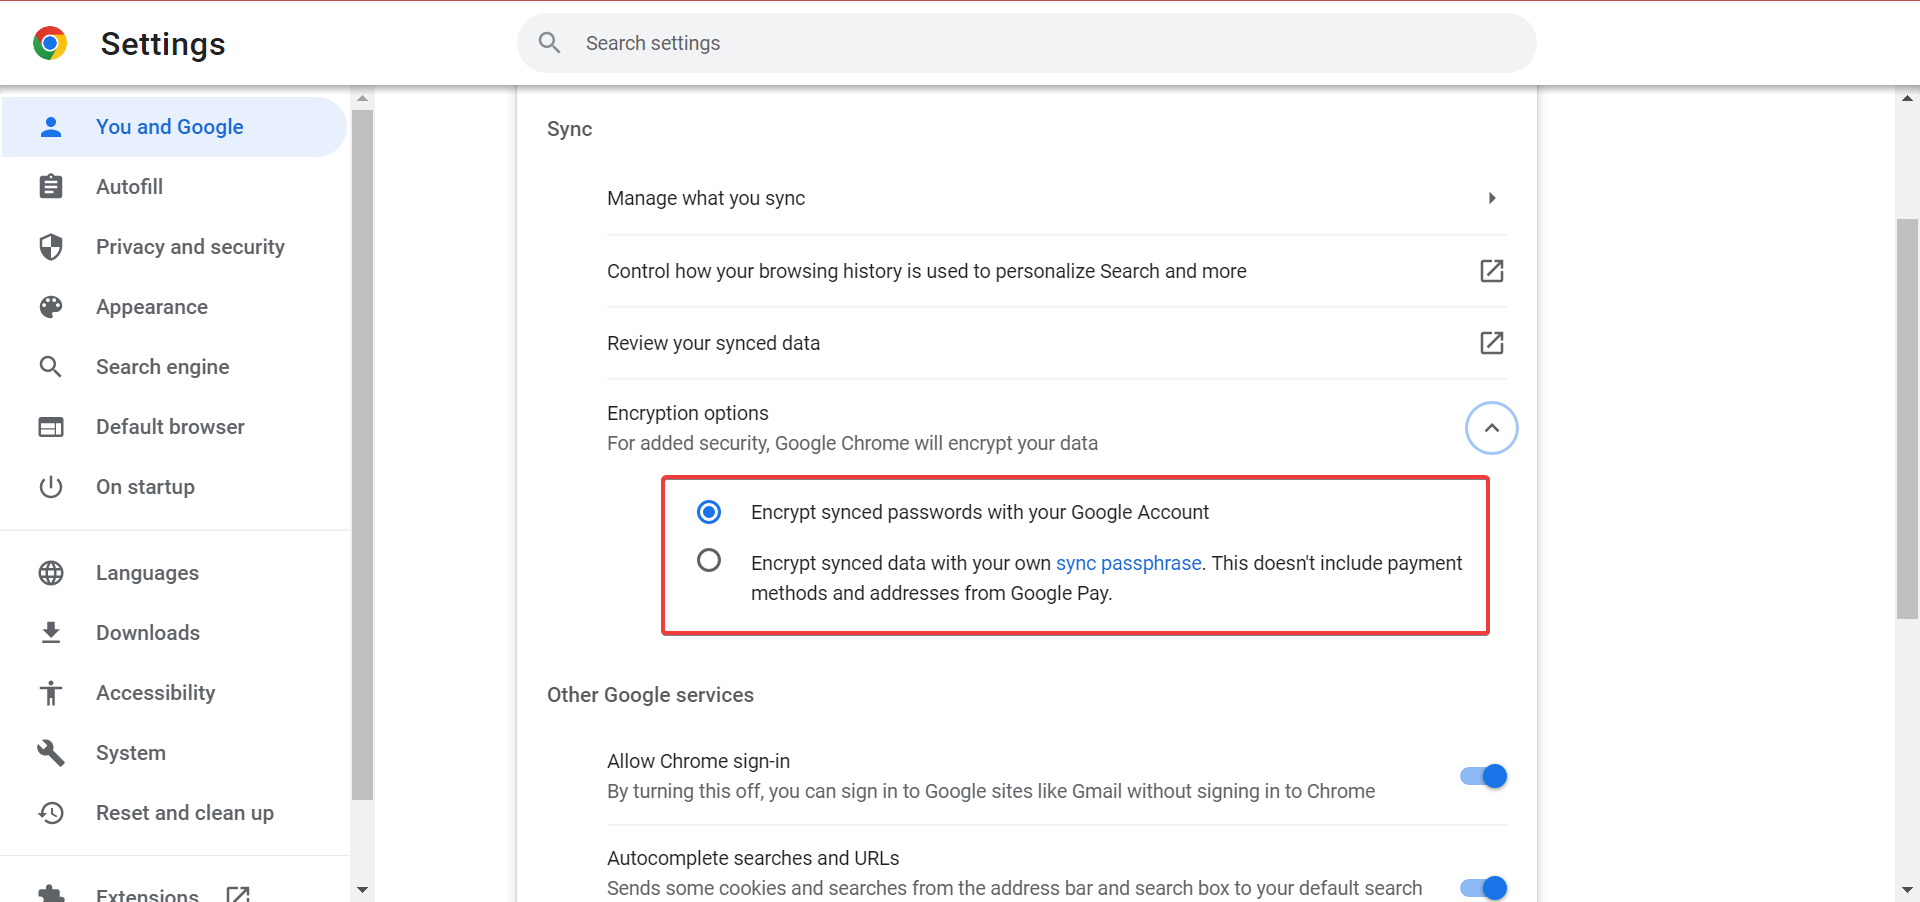 How do I sync my Google account to my laptop?